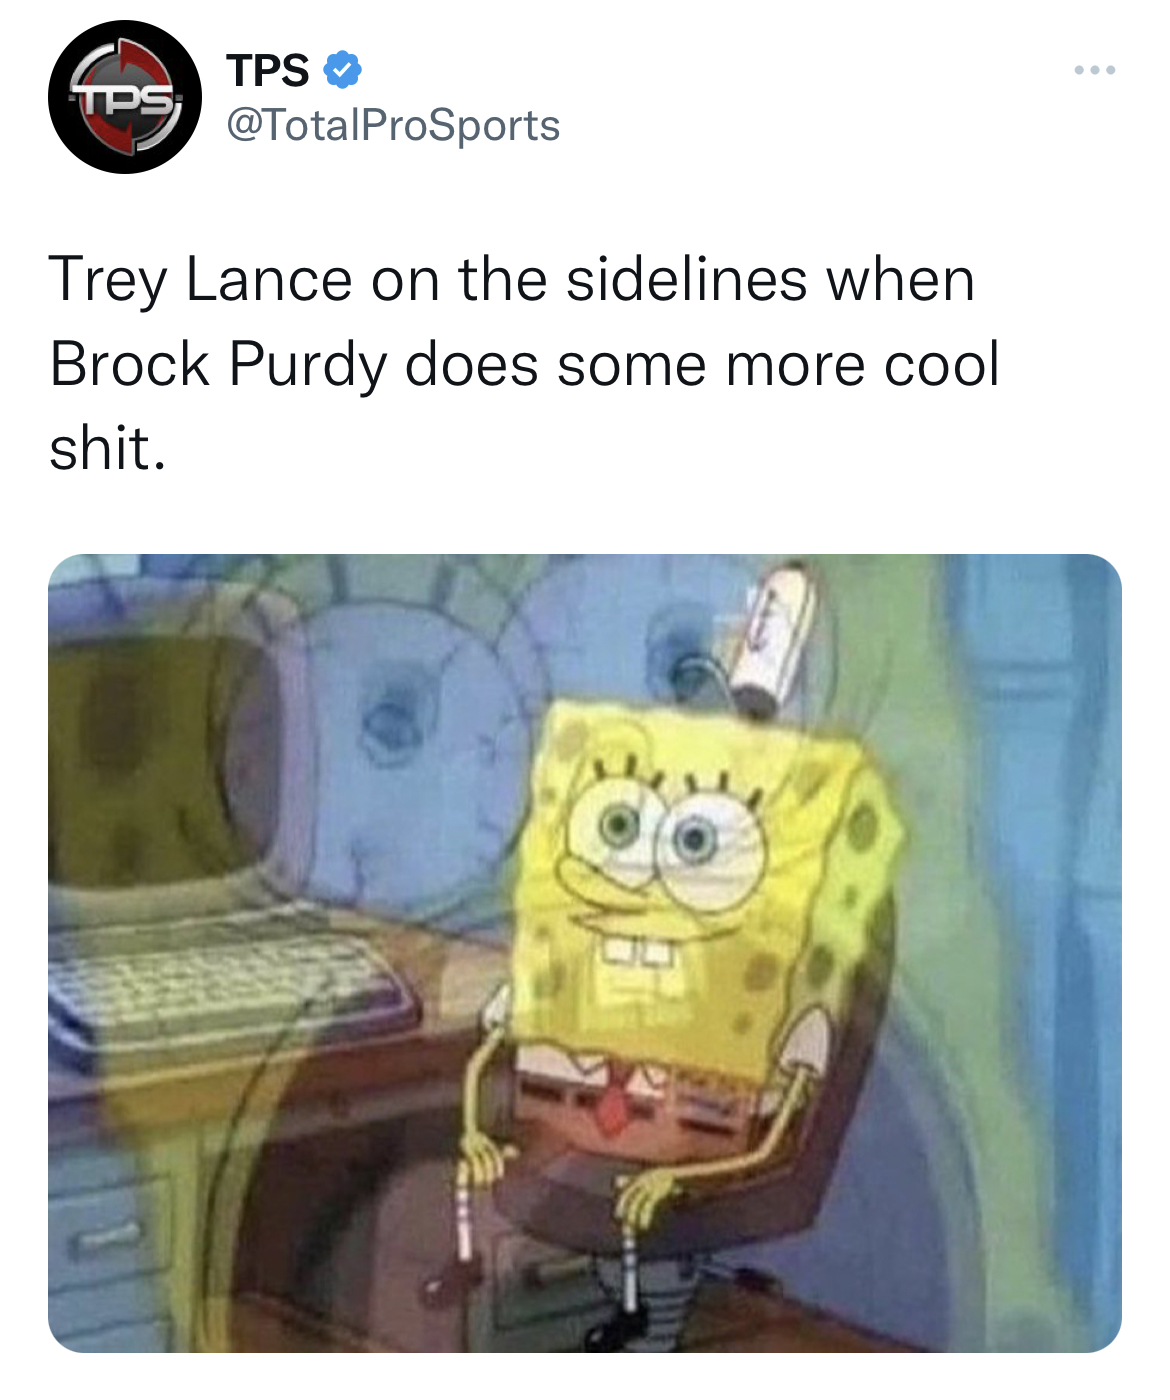 tweets dunking on celebs - Meme - Tps Tps Trey Lance on the sielines when Brock Purdy does some more cool shit.